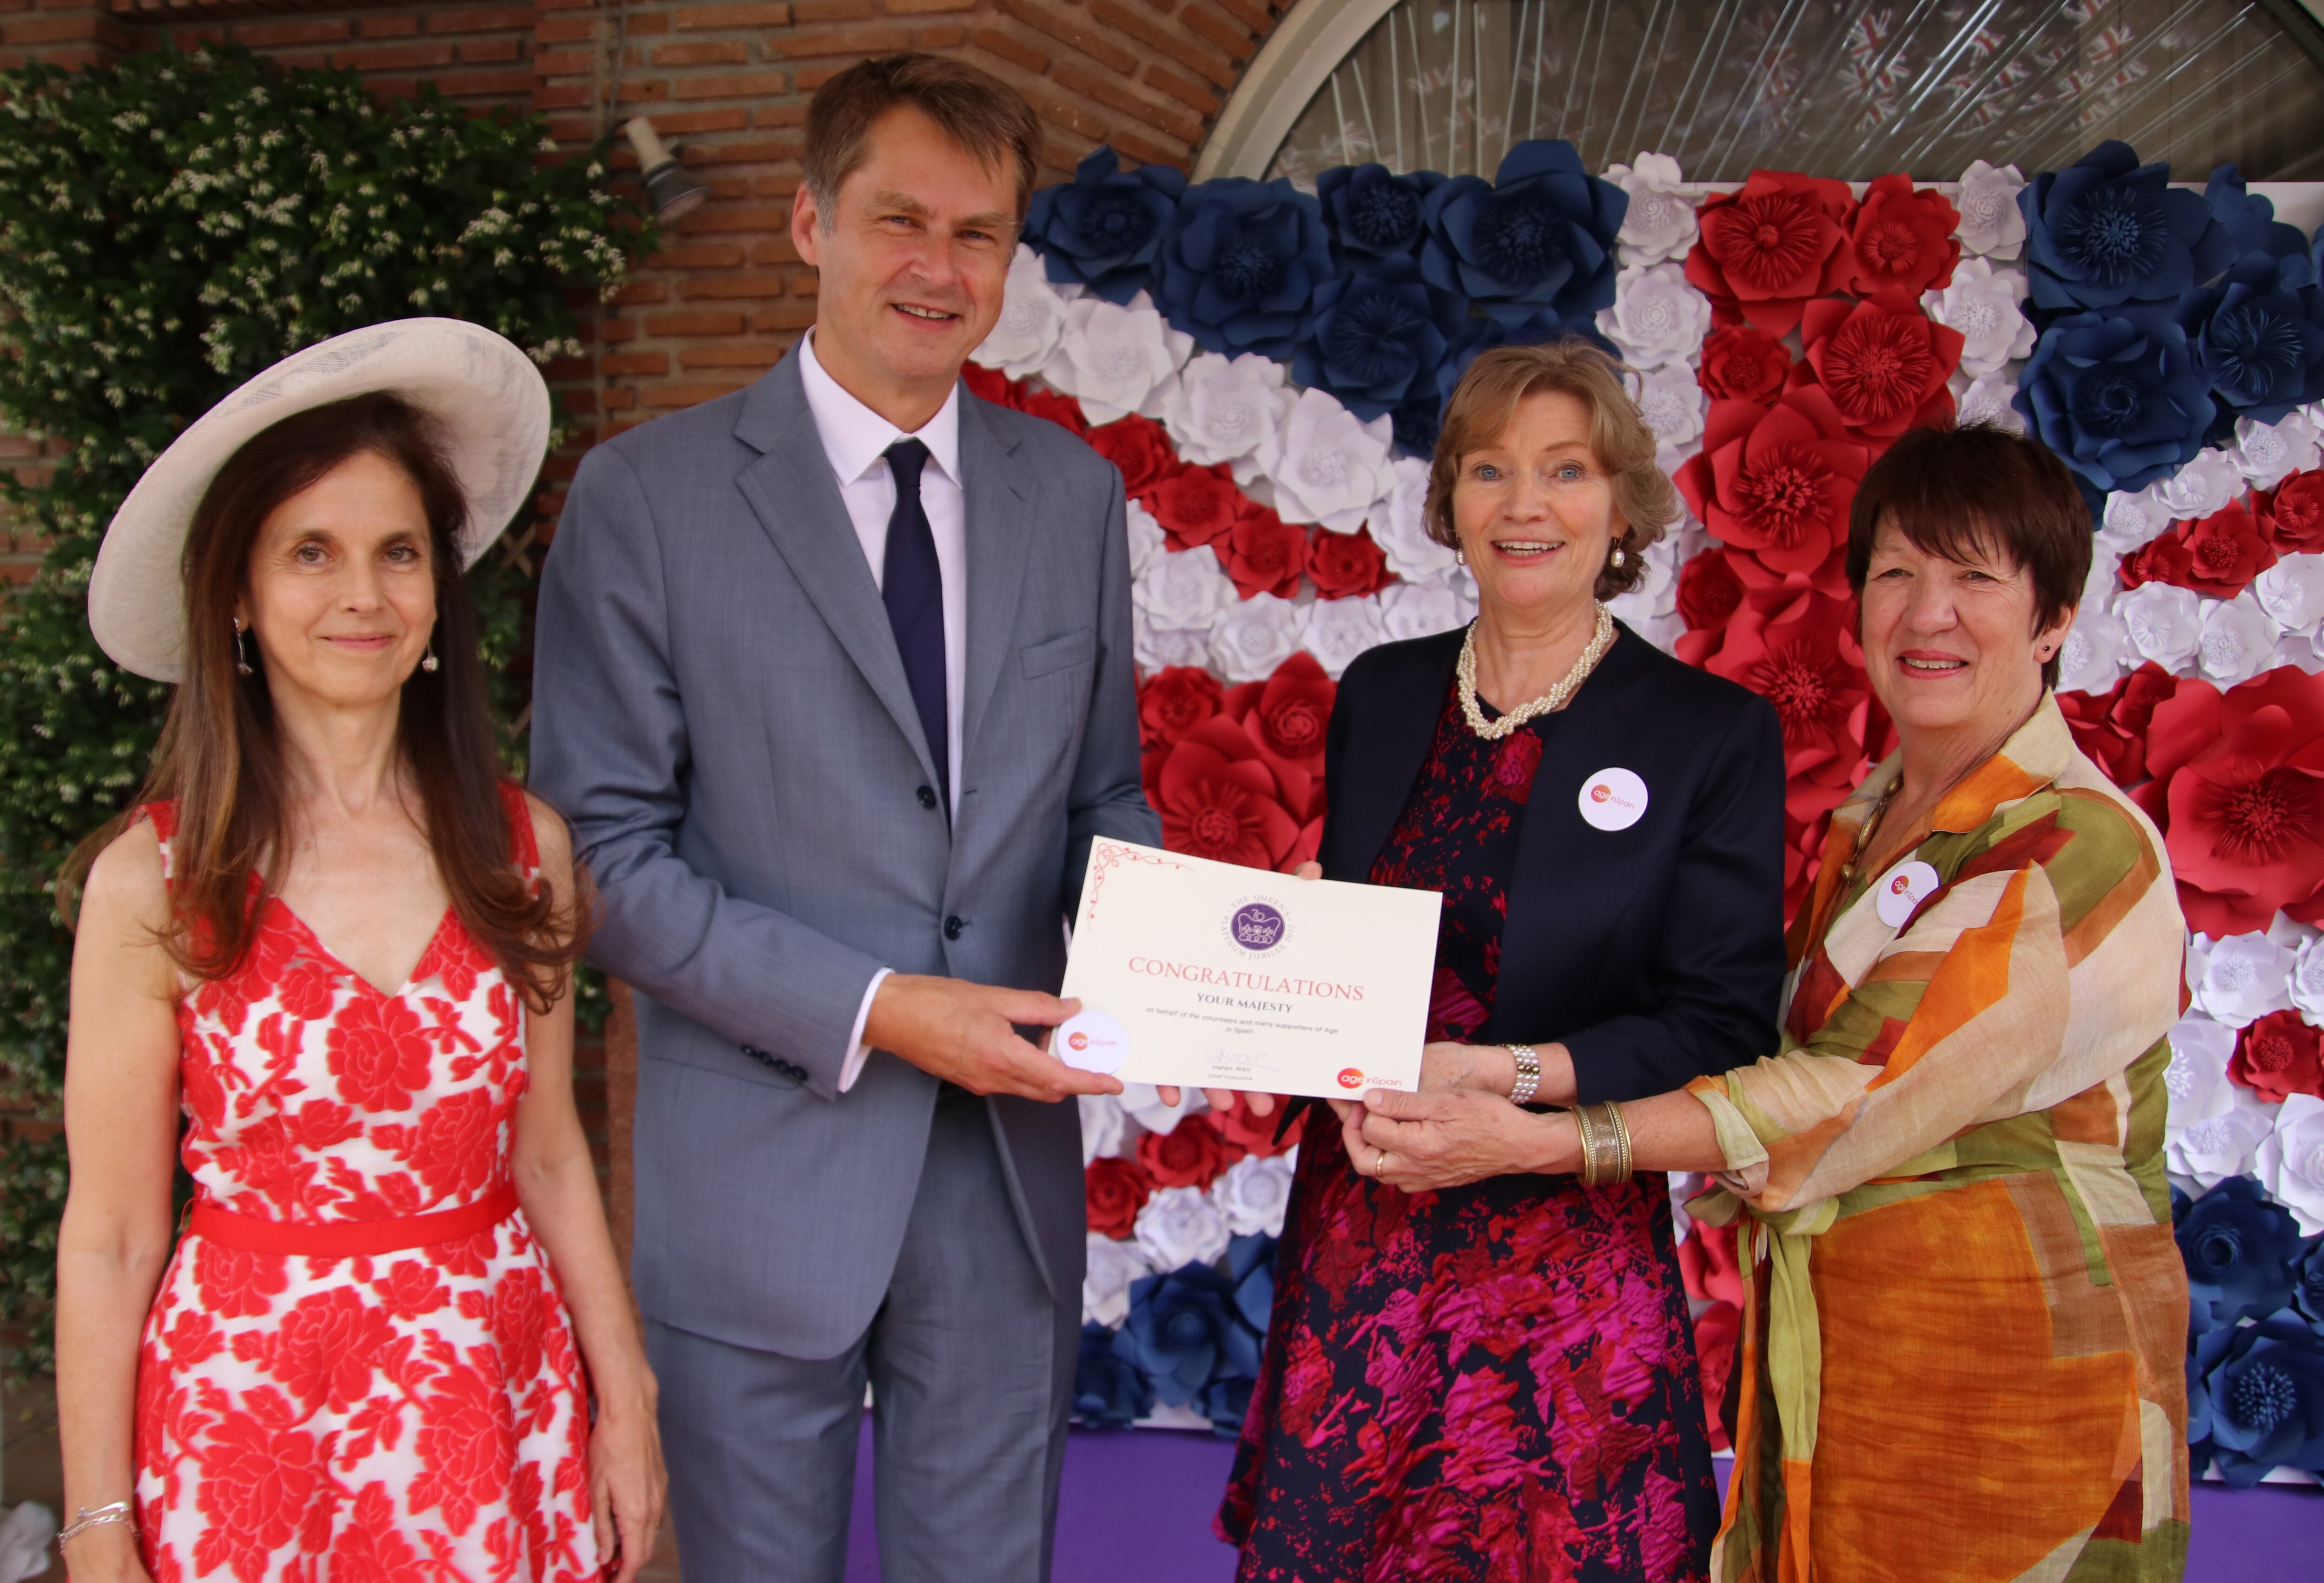 The Queen's Platinum Jubilee was marked in Madrid with a function hosted at the residence of Her Majesty's Ambassador to Spain and Andorra